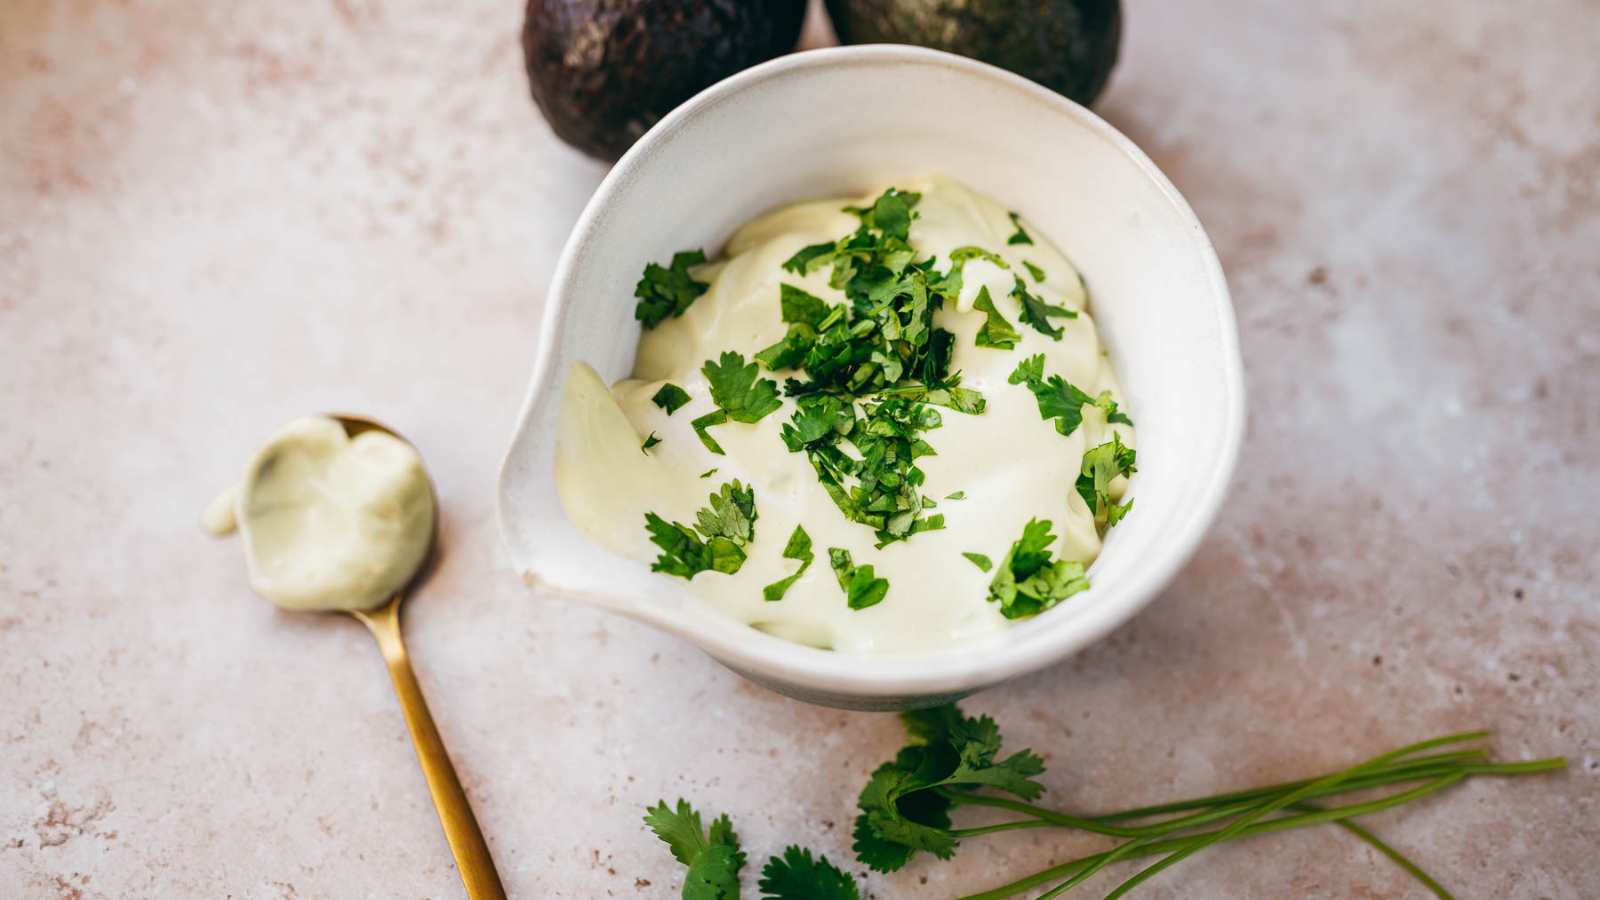 A small white ceramic bowl filled with a creamy green sauce garnished with fresh green cilantro leaves.